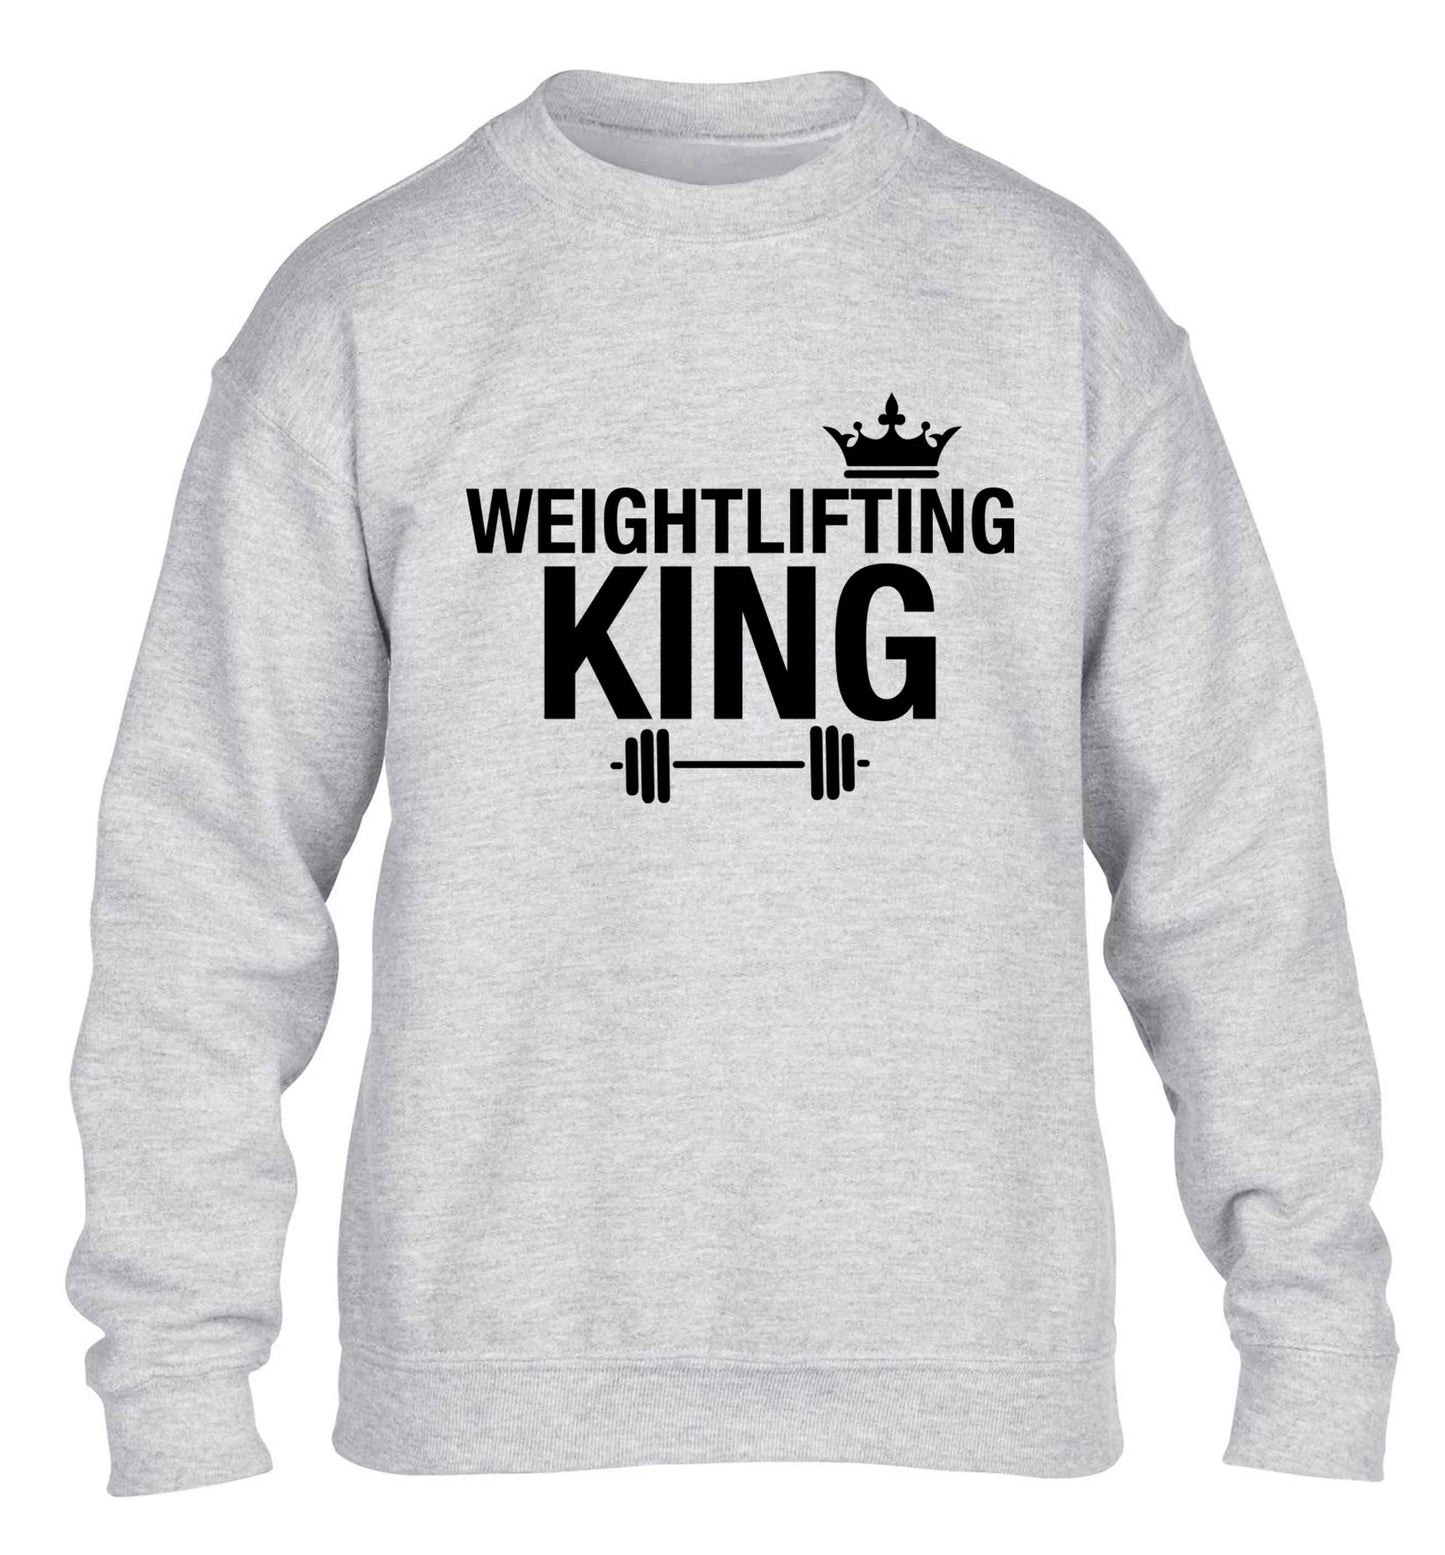 Weightlifting king children's grey sweater 12-13 Years